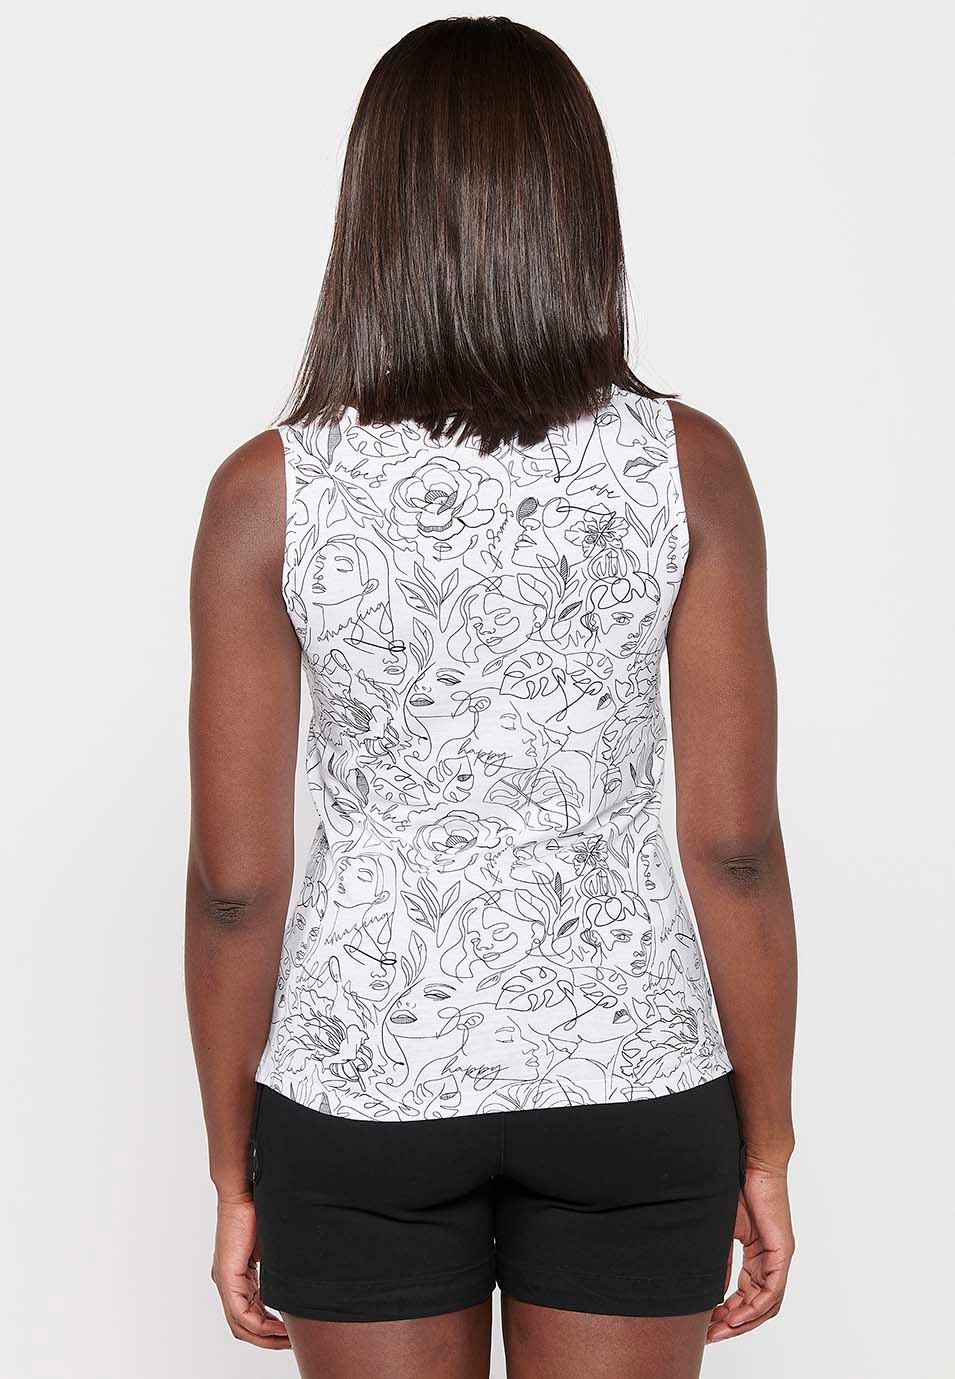 Cotton Sleeveless T-shirt with Round Neckline with White Floral Print for Women 5